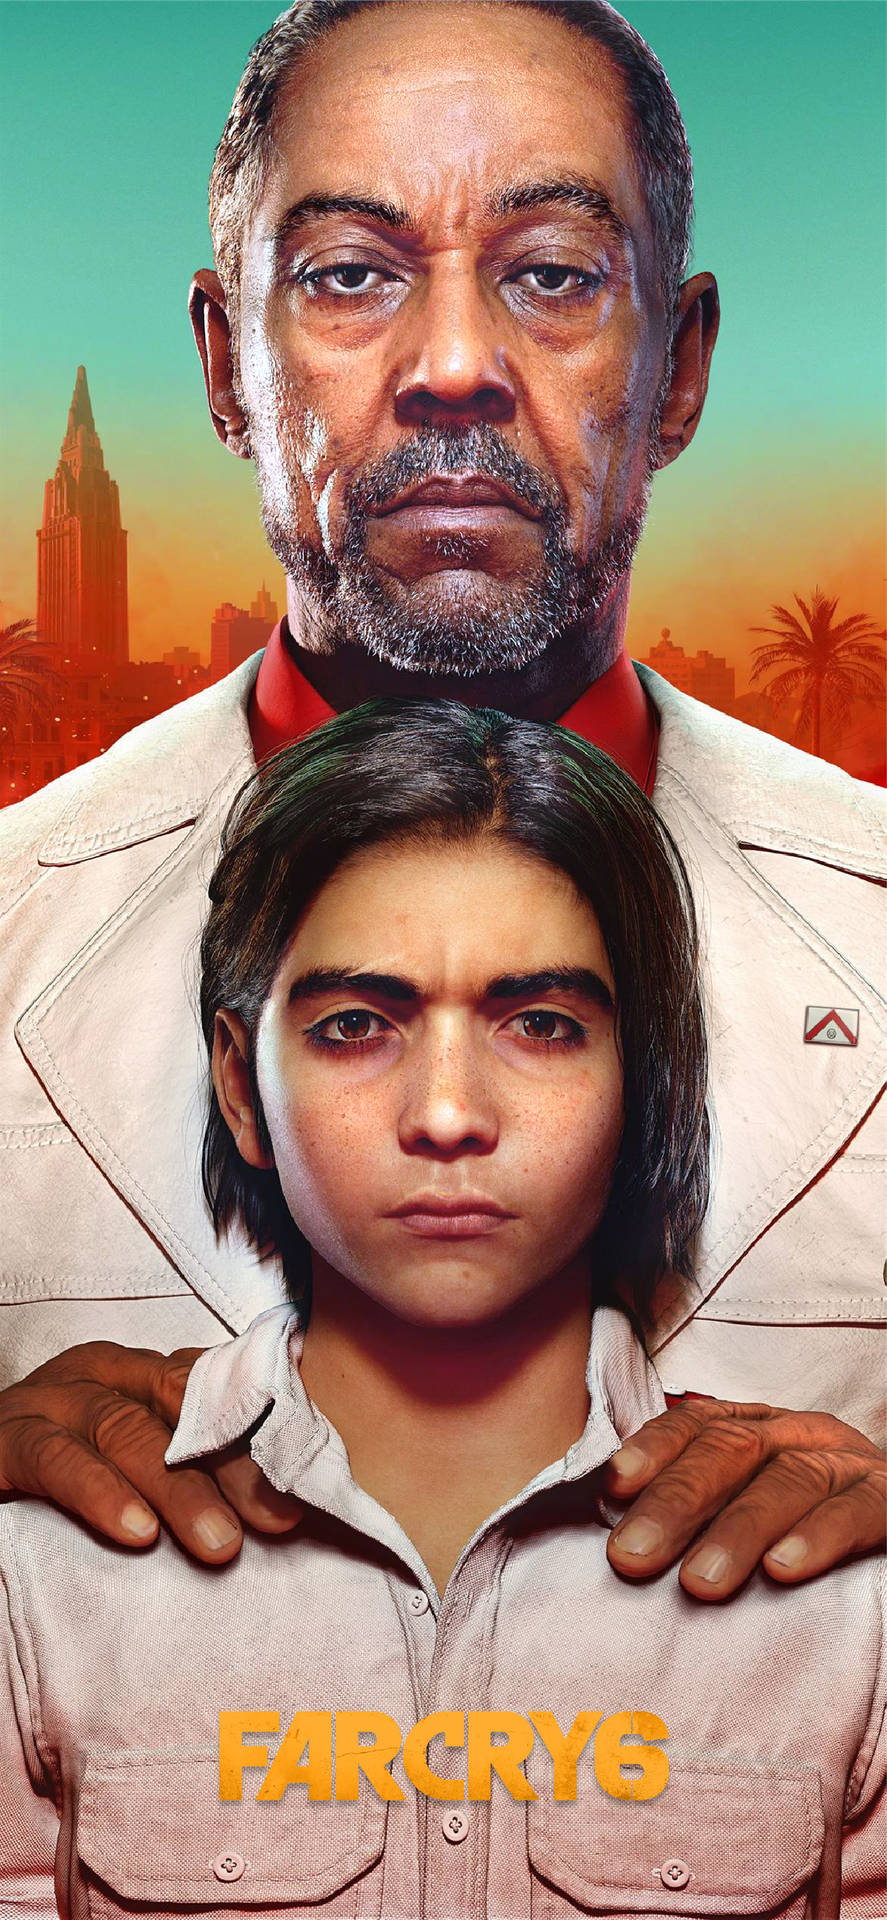 Father And Son Far Cry Iphone Background